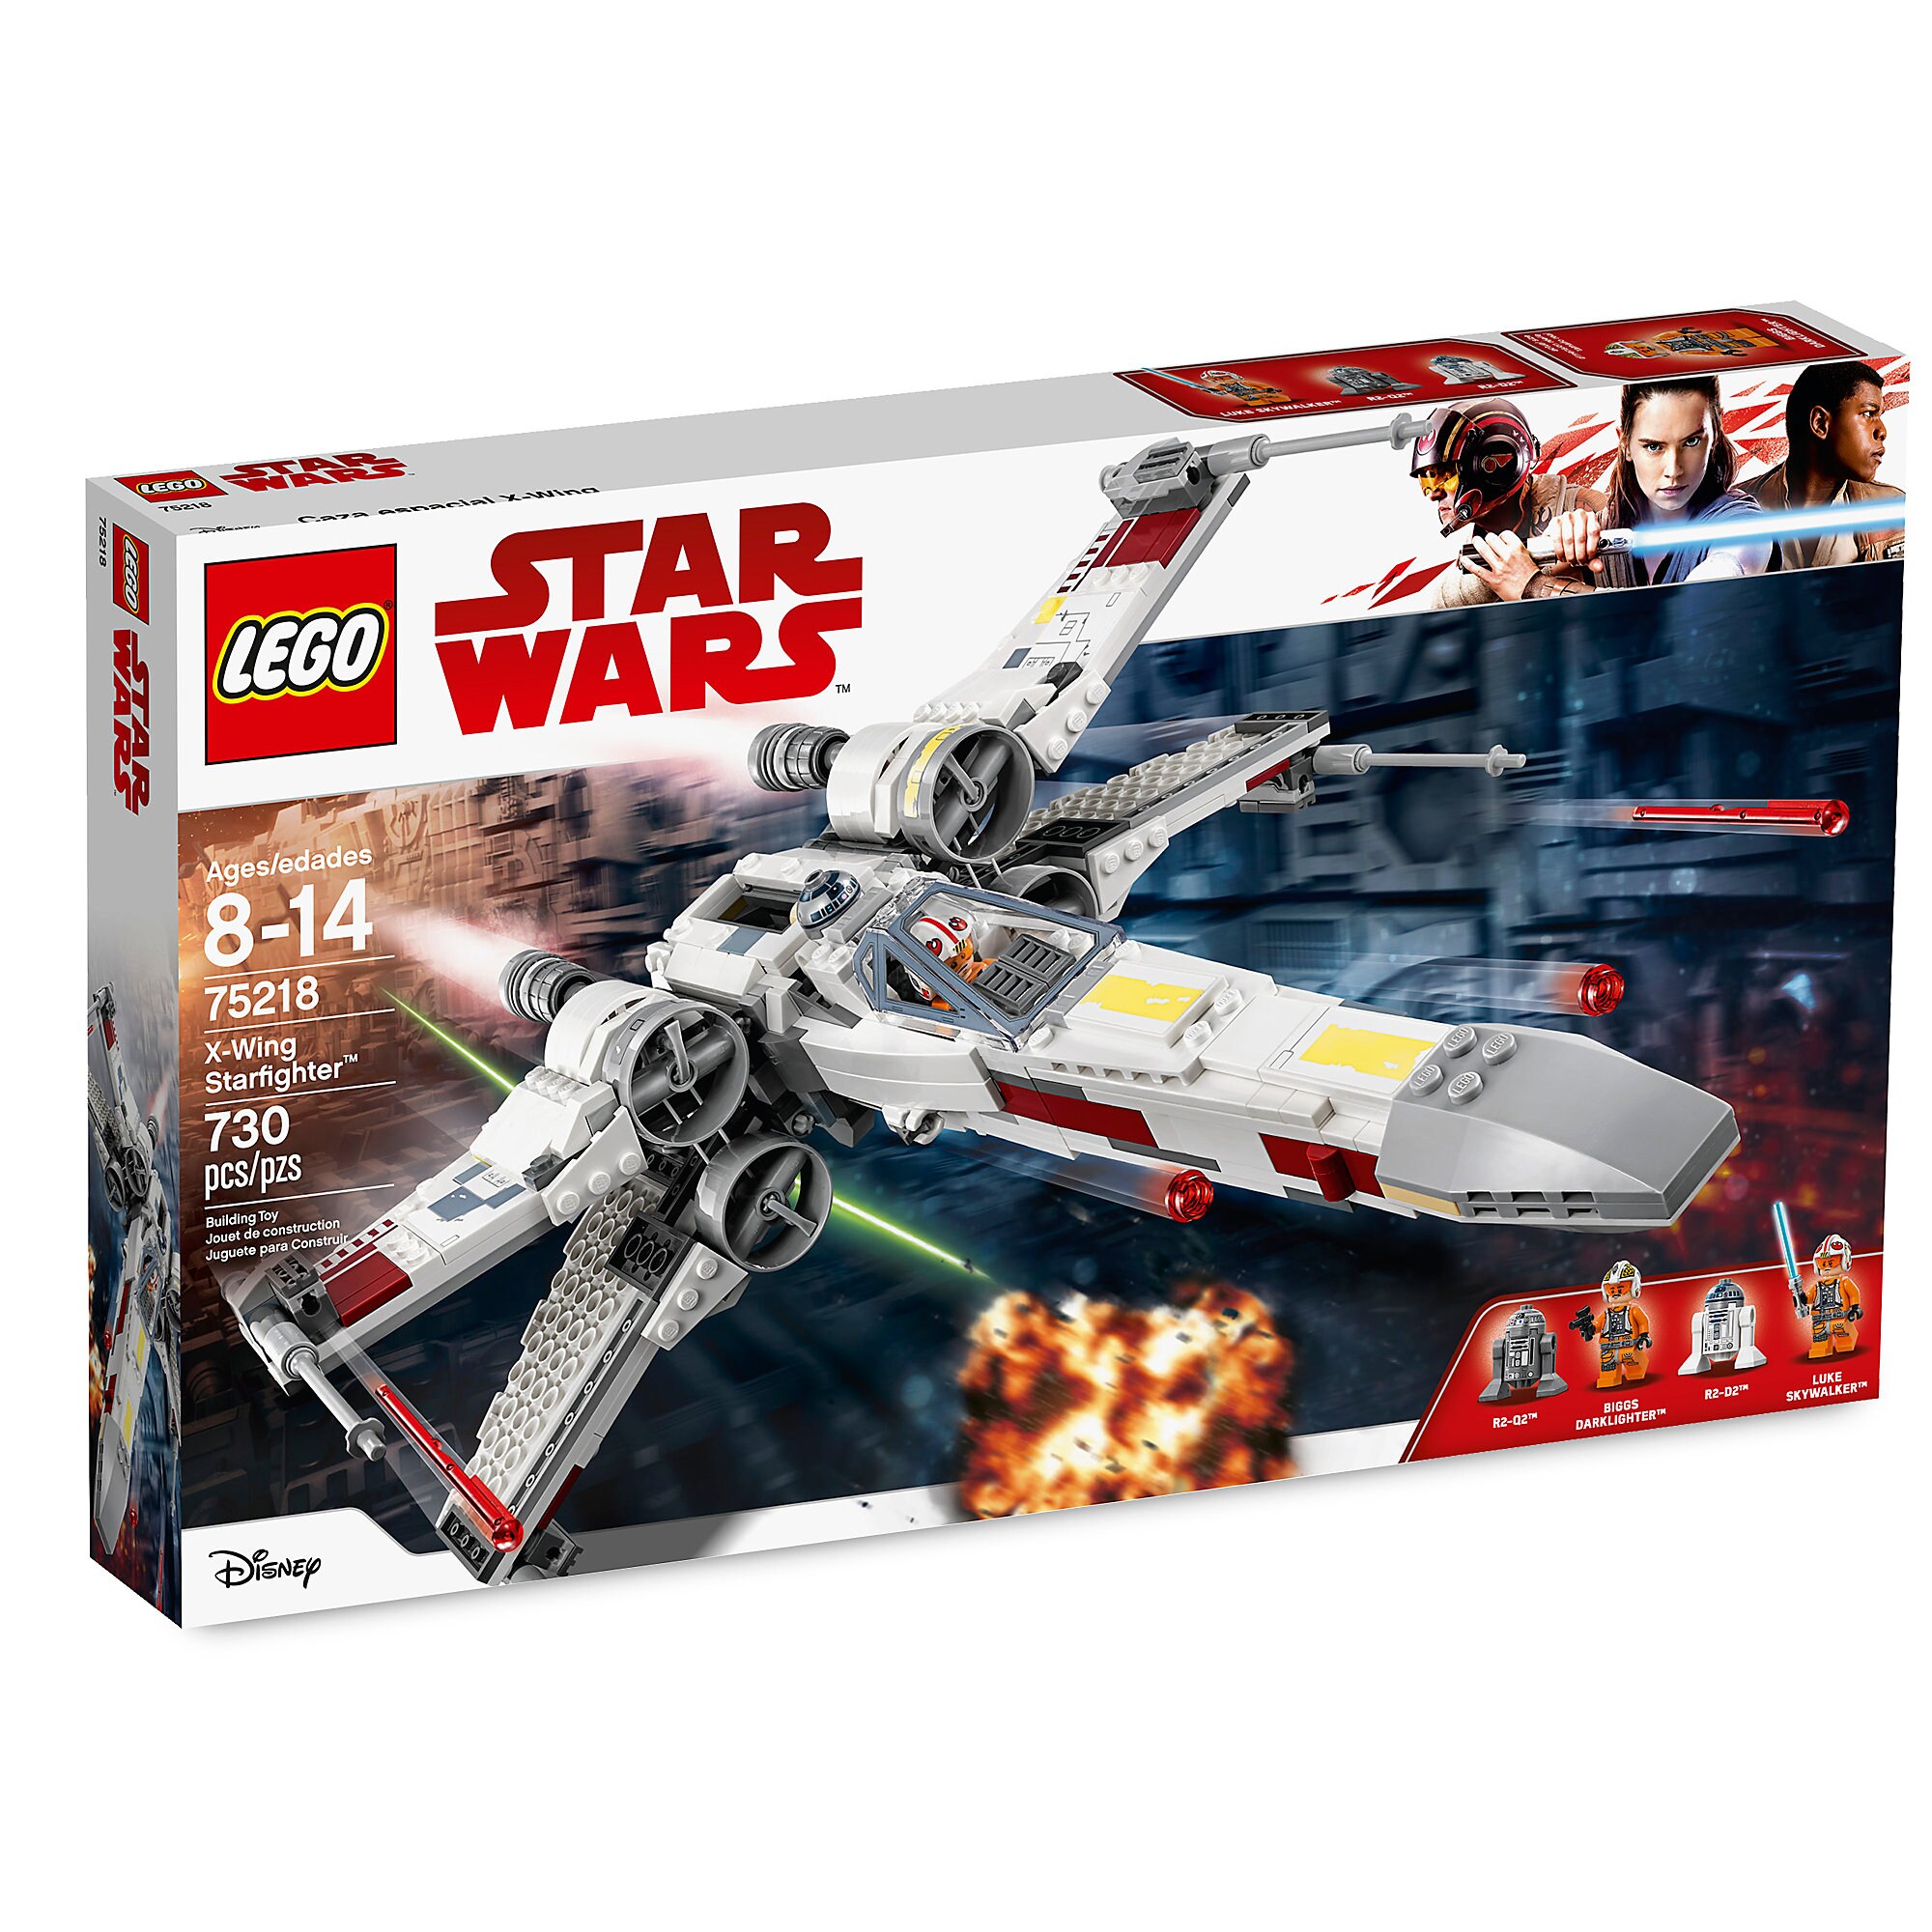 X-Wing Starfighter Playset by LEGO - Star Wars